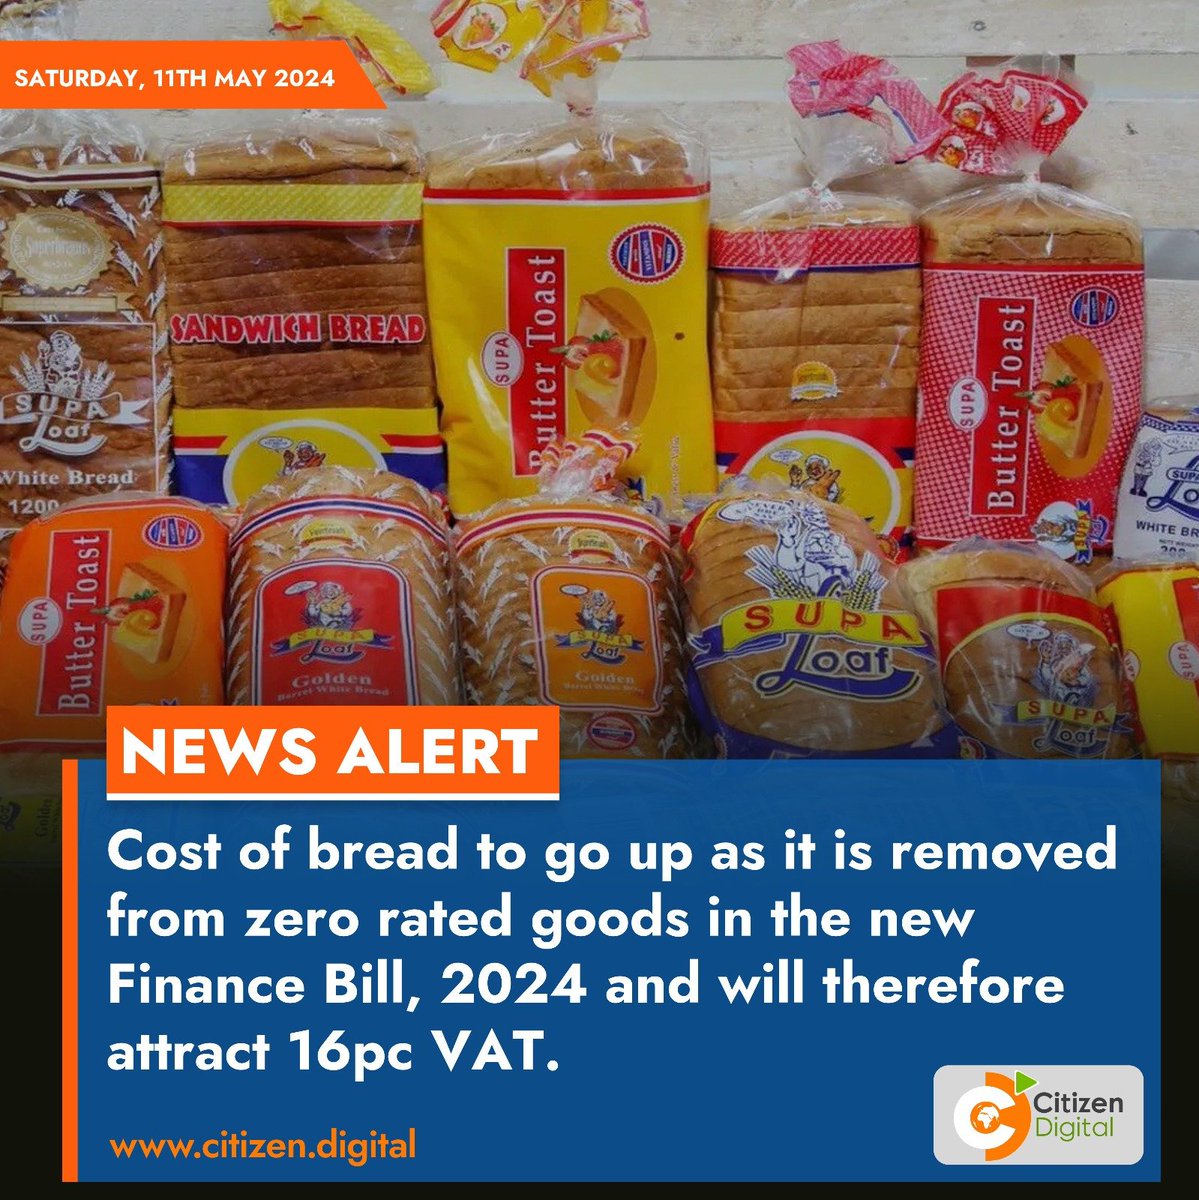 Cost of bread to go up as it is removed from zero rated goods in the new Finance Bill, 2024 and will therefore attract 16pc VAT.